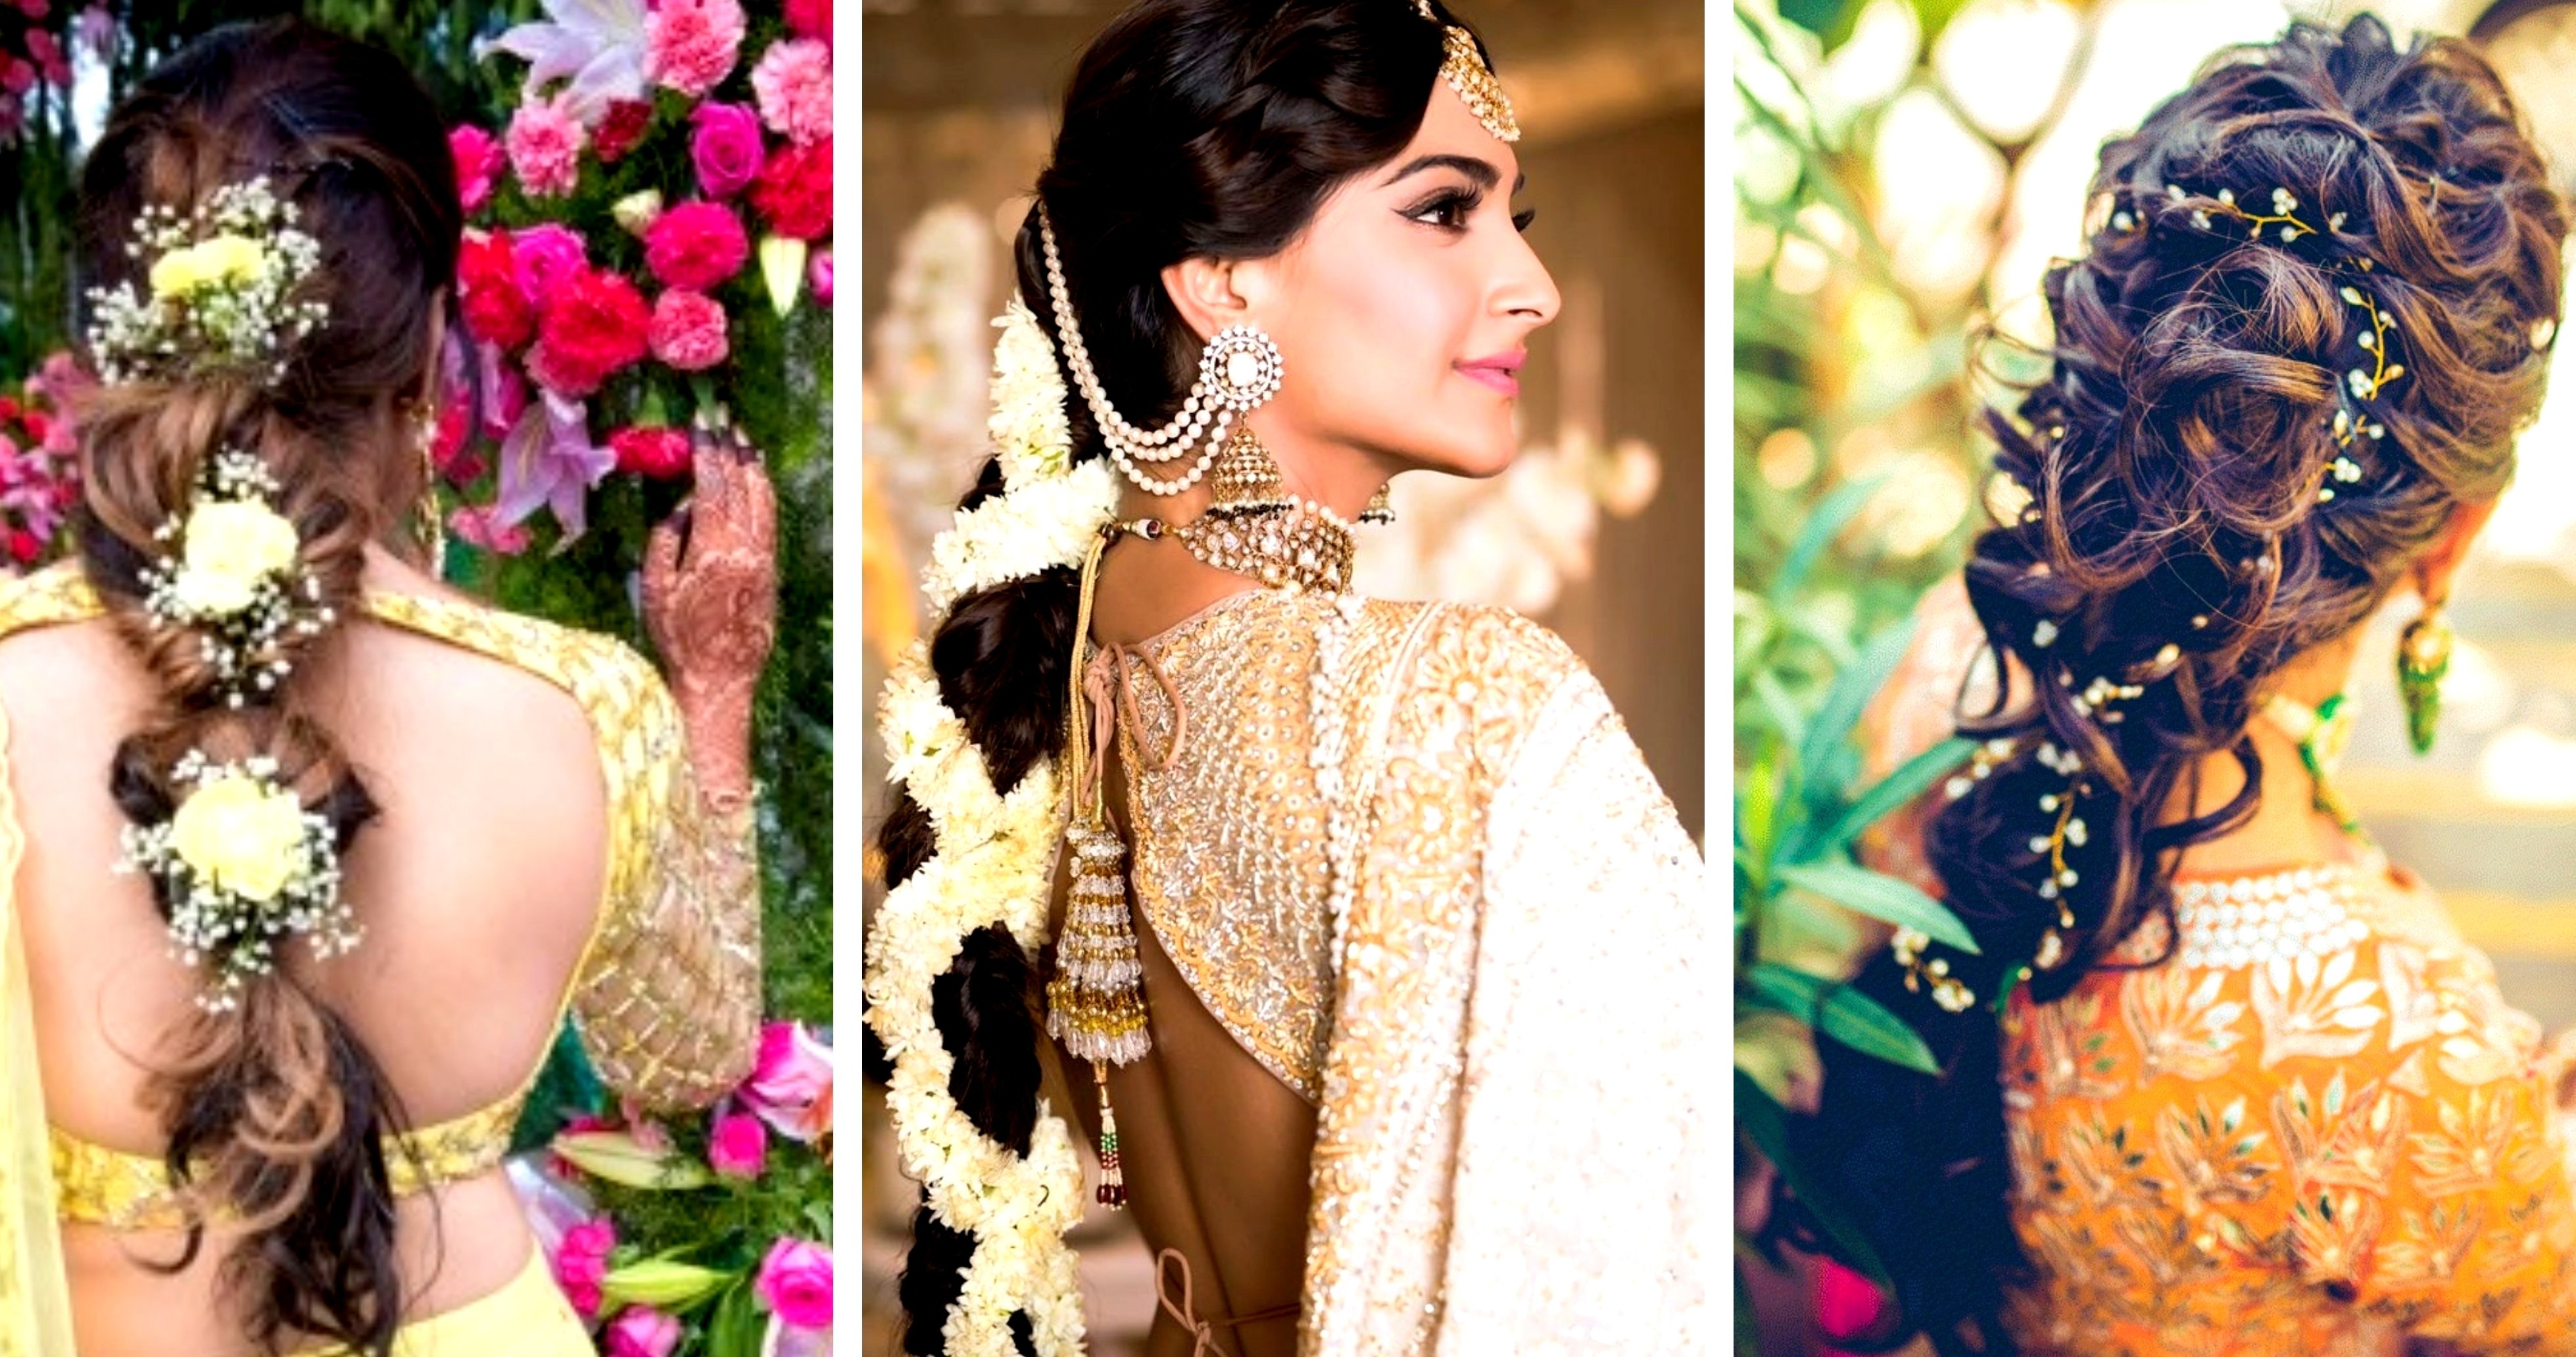 30 Best Indian Bridal Hairstyles Trending This Wedding Season! - Blog intended for South Asian Wedding Hairstyles